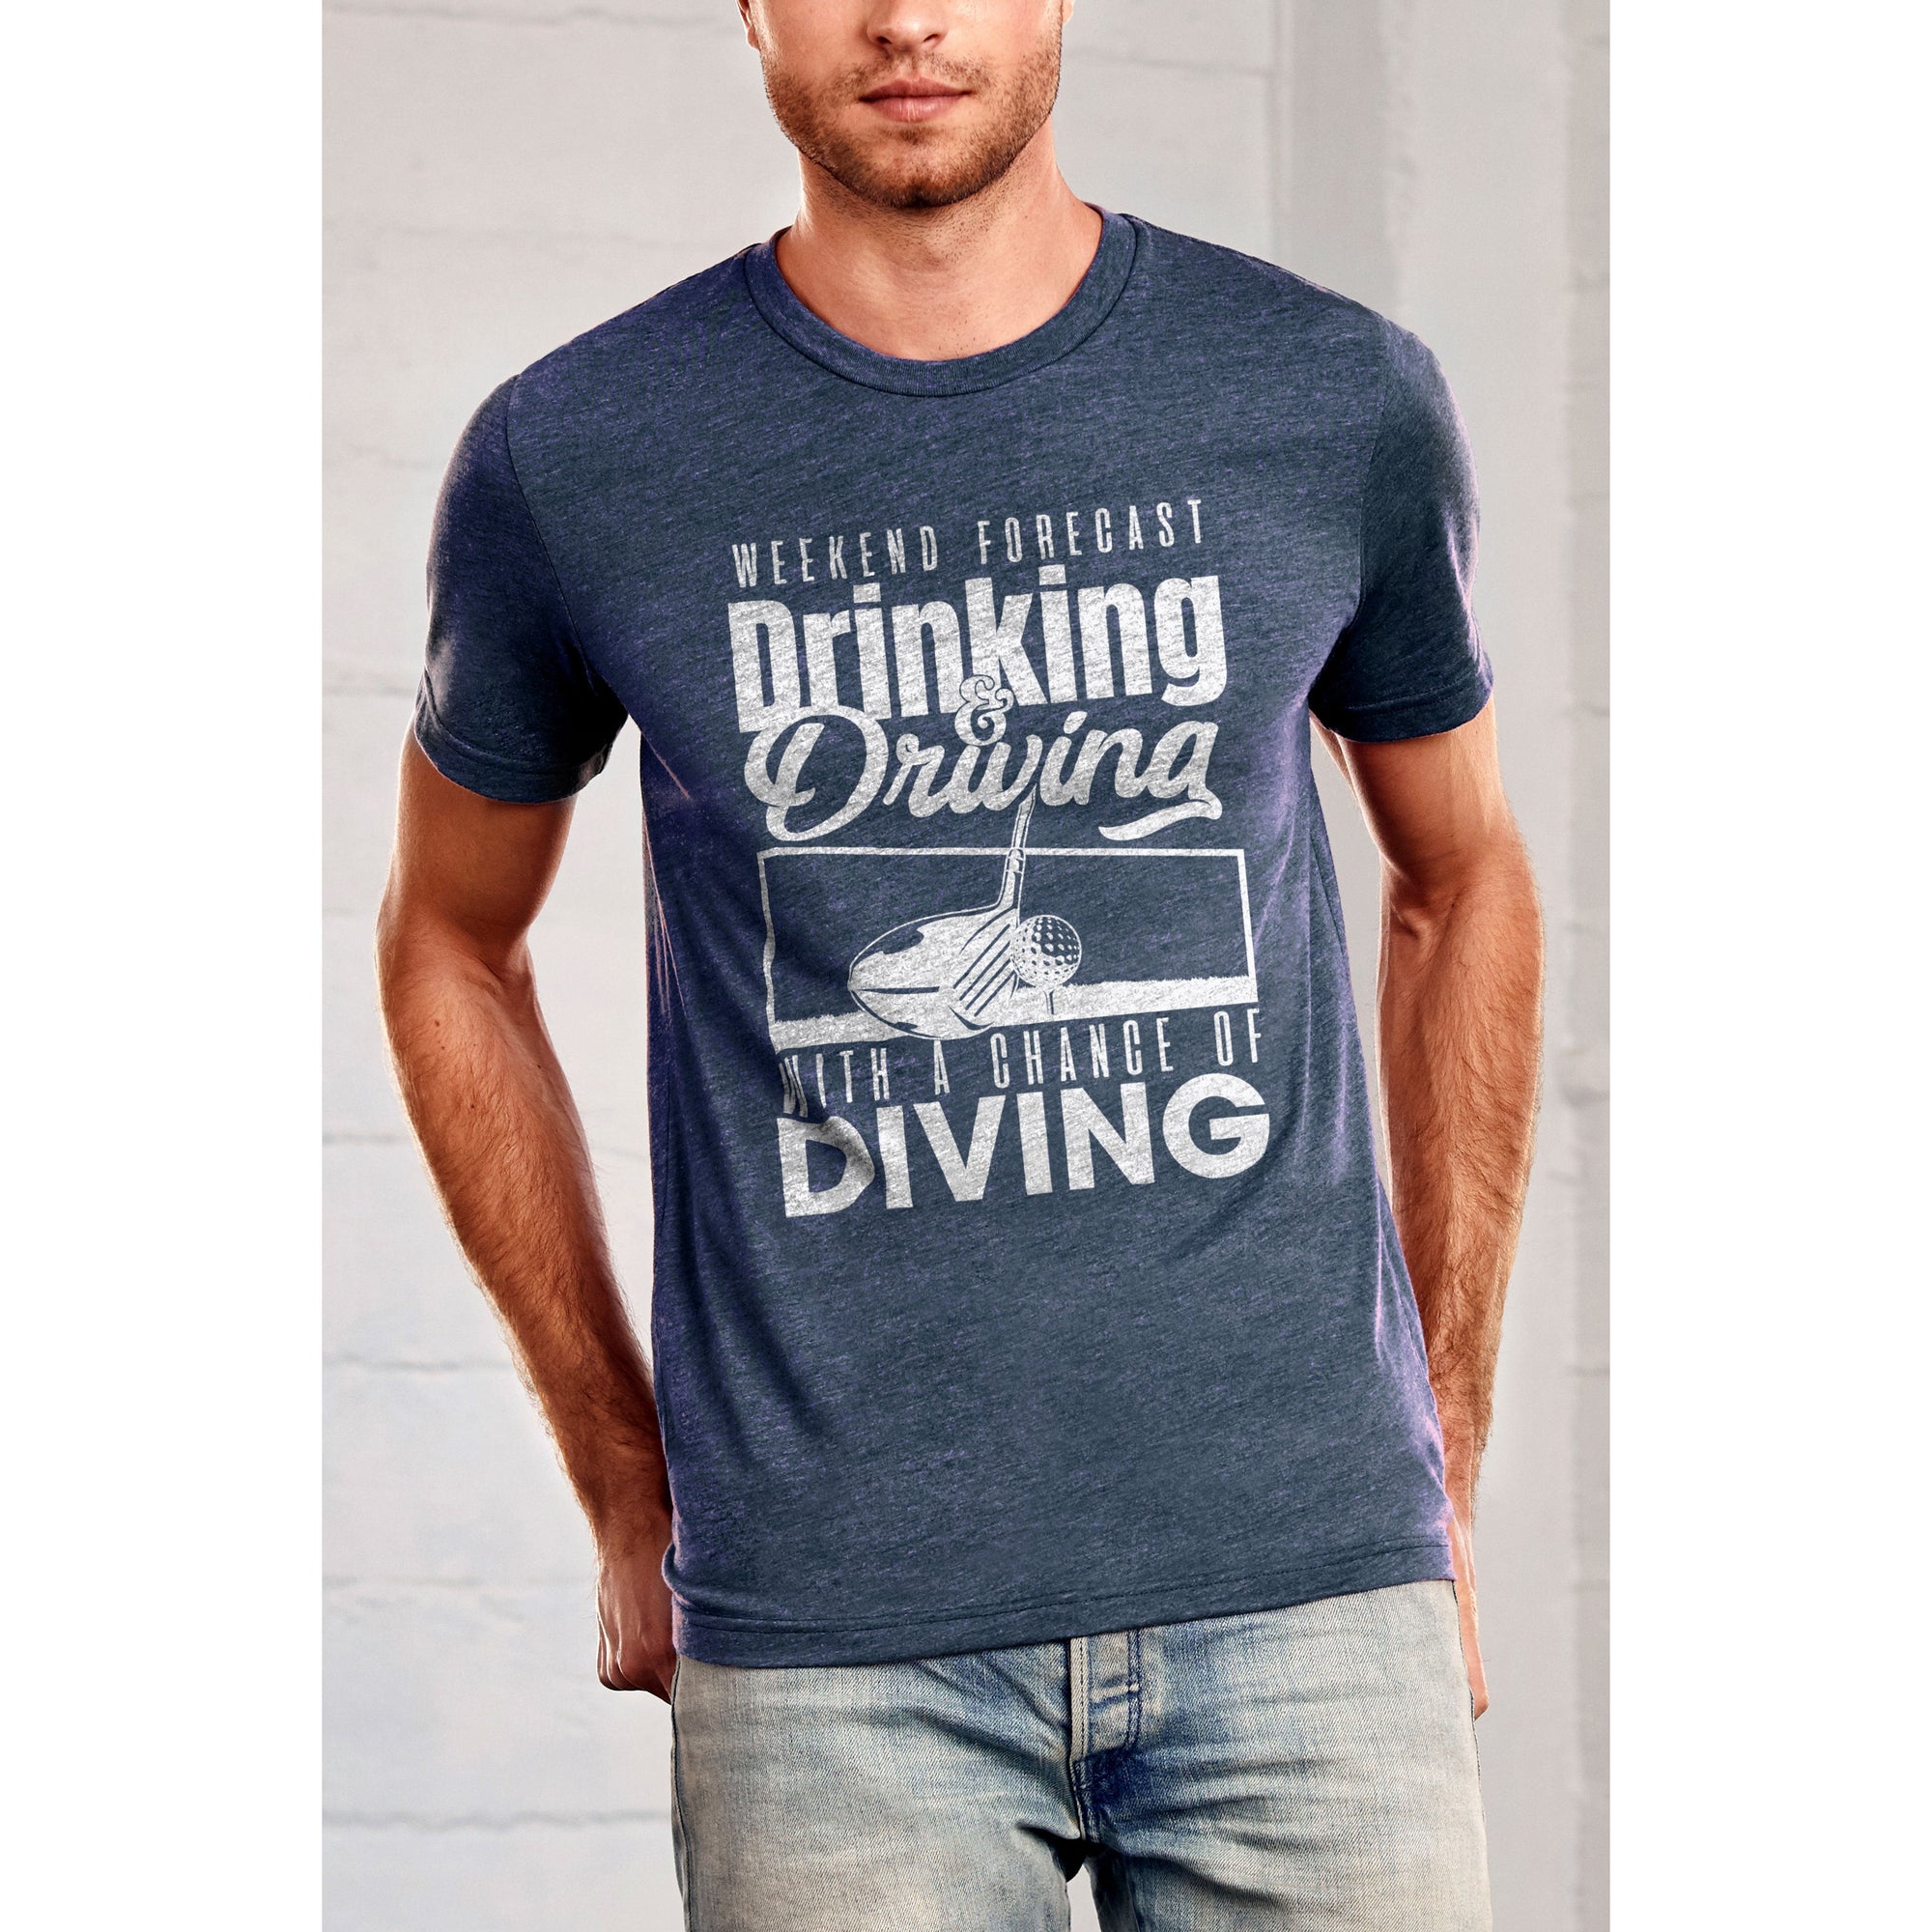 Weekend Forecast Drinking & Driving With A Chance Of Diving - threadtank | stories you can wear